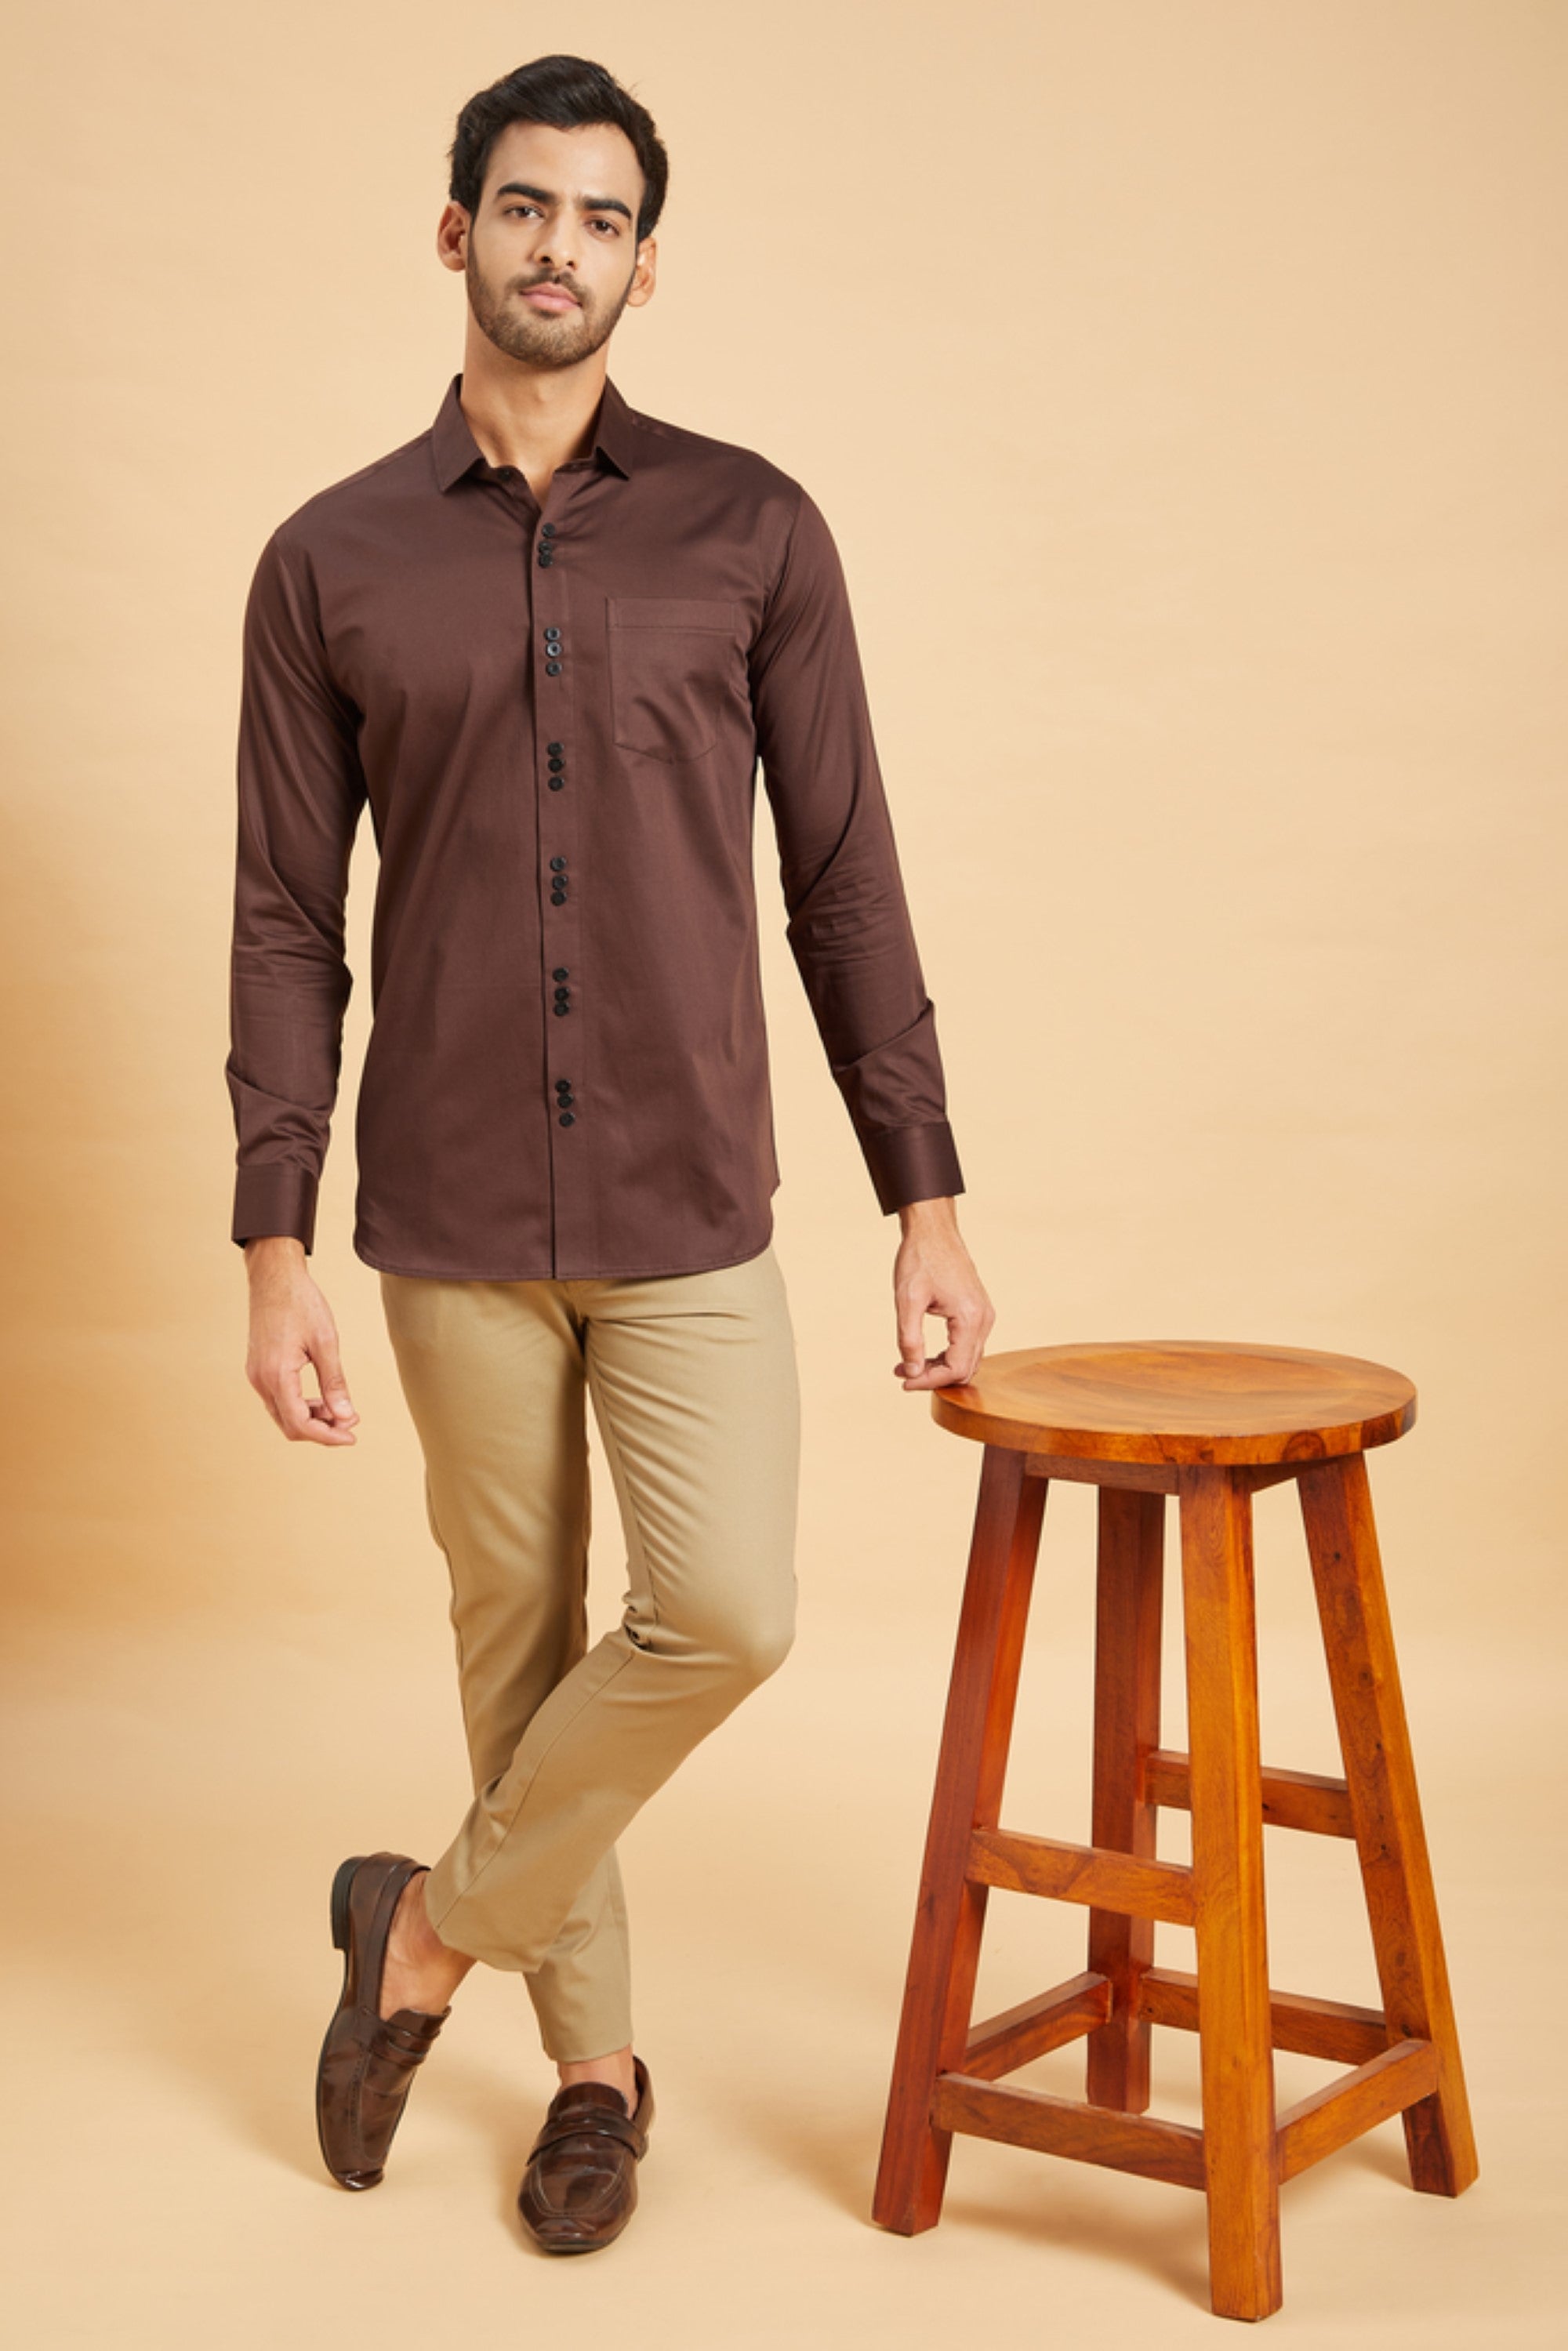 Men's Brown Color Browned Pattern Shirt Full Sleeves Casual Shirt - Hilo Design